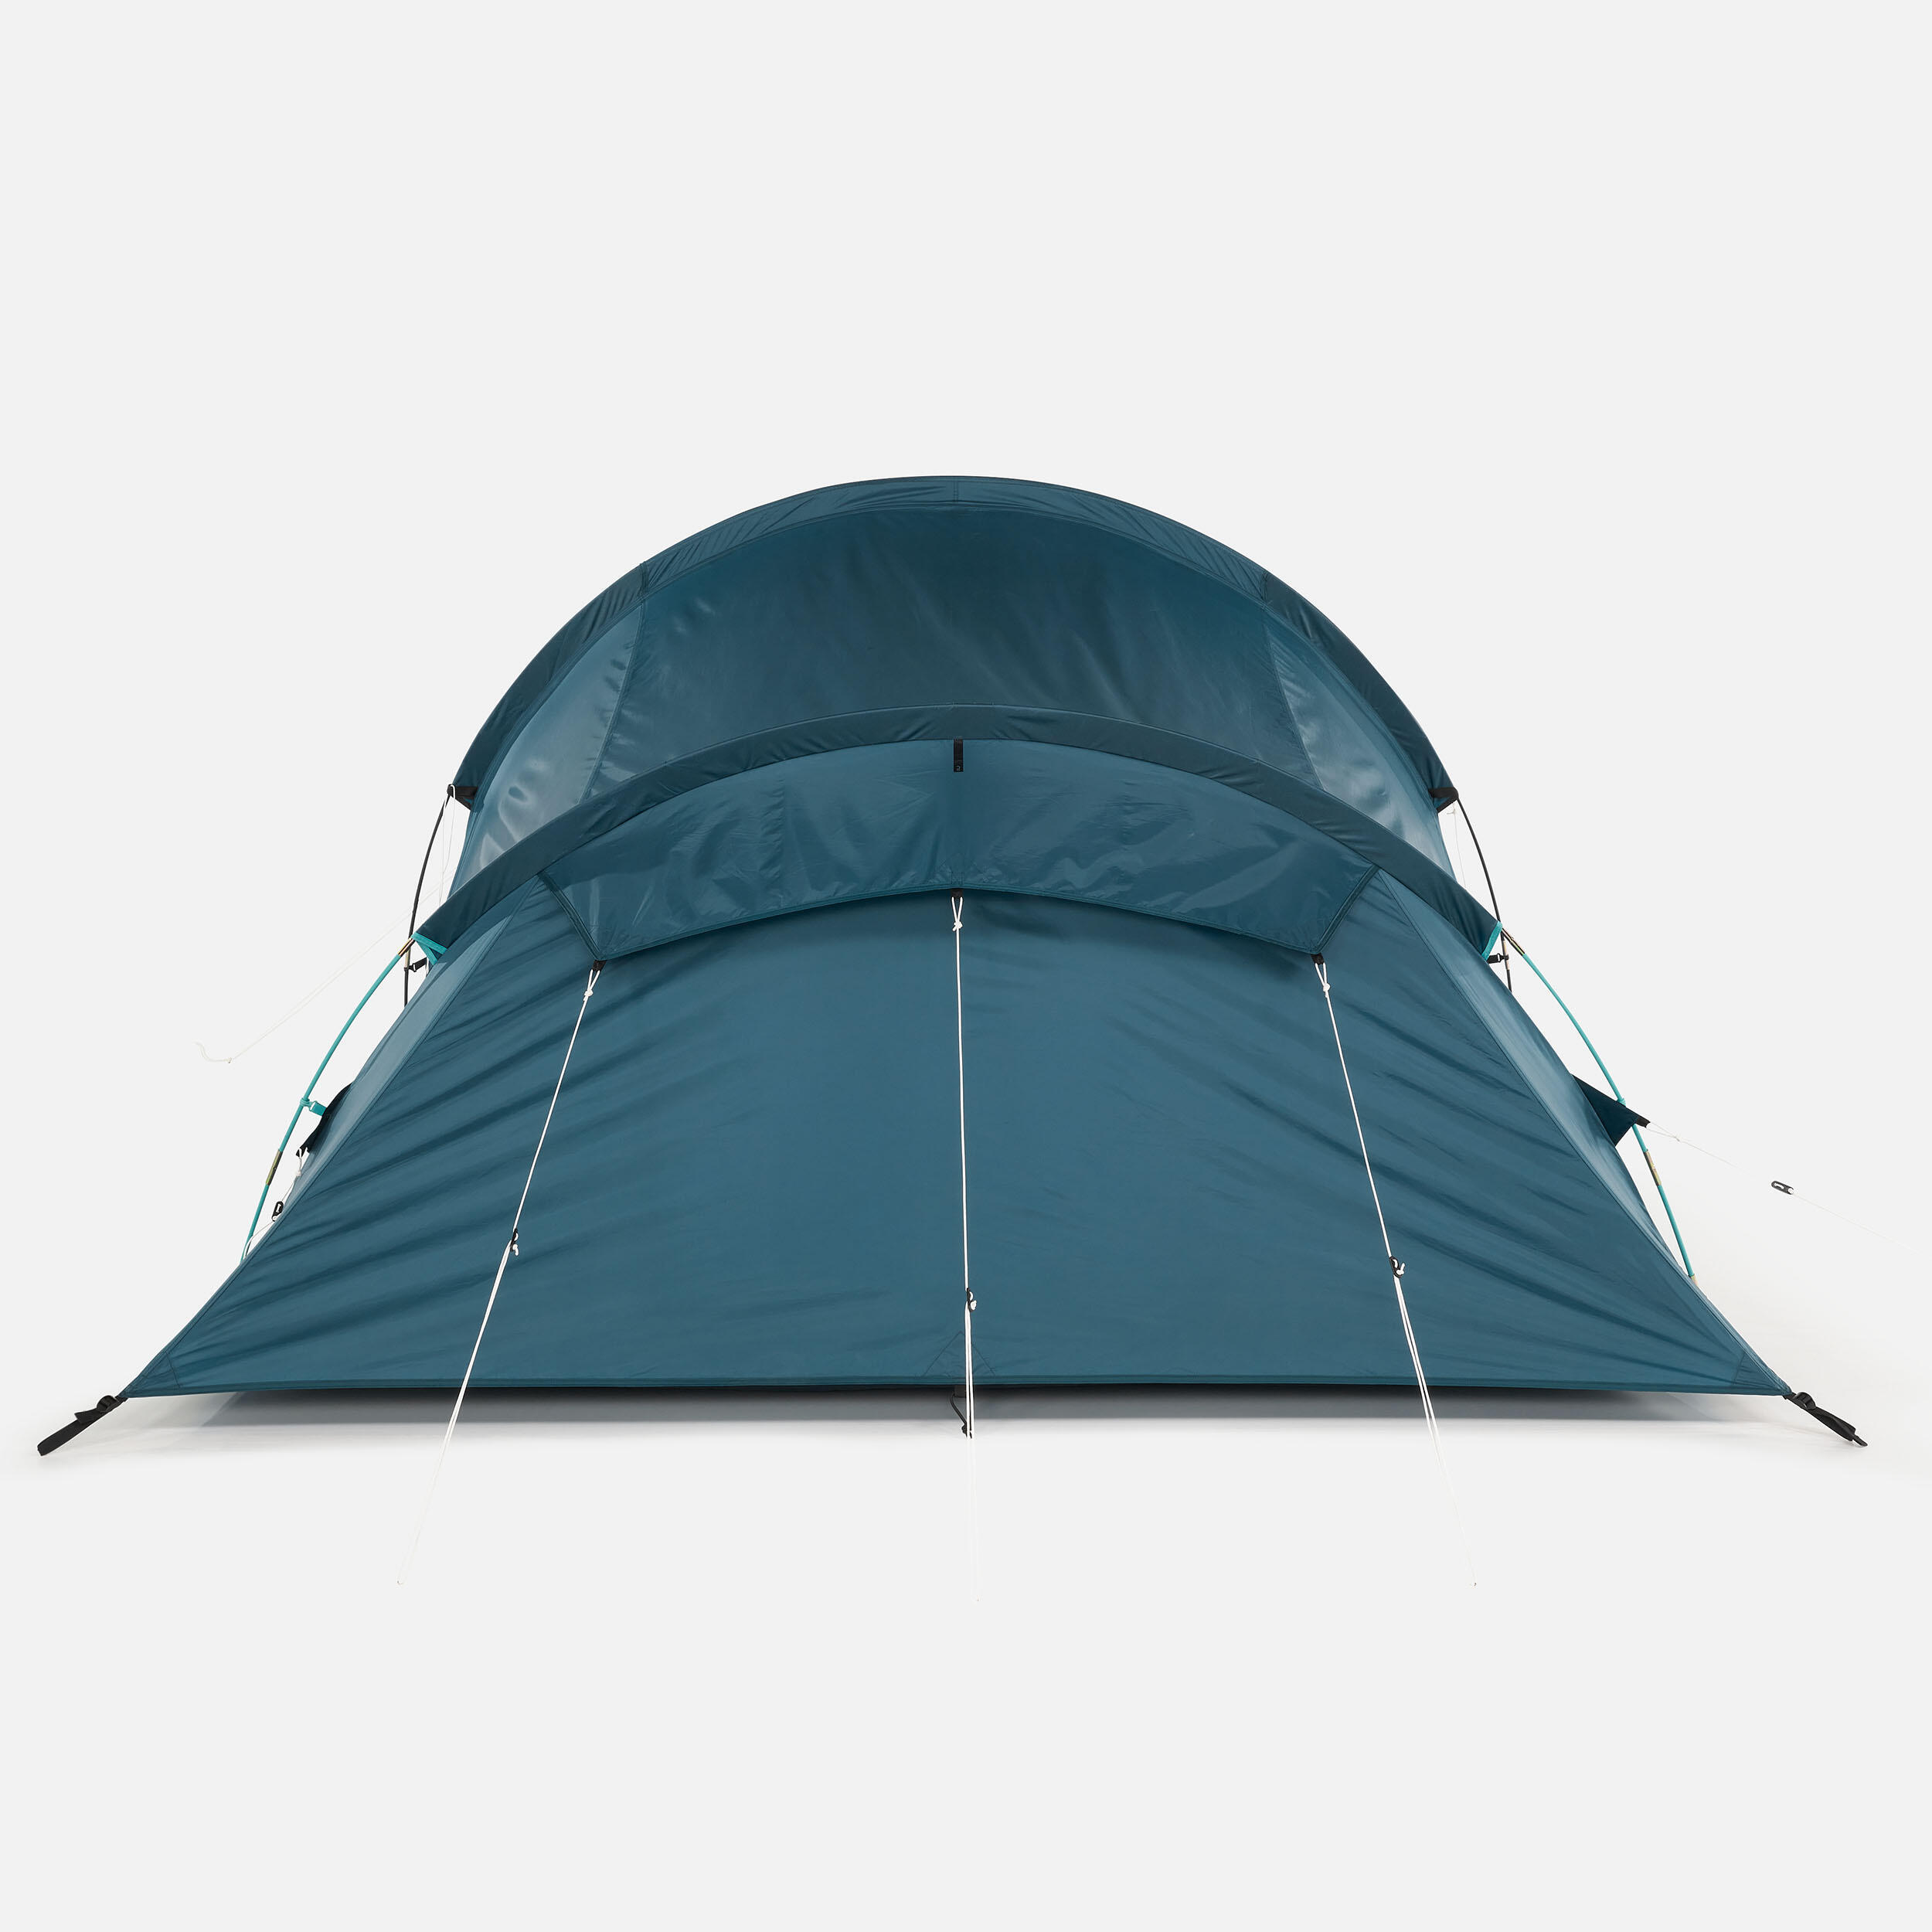 Camping tent - MH100 XXL - 4 person 10/15